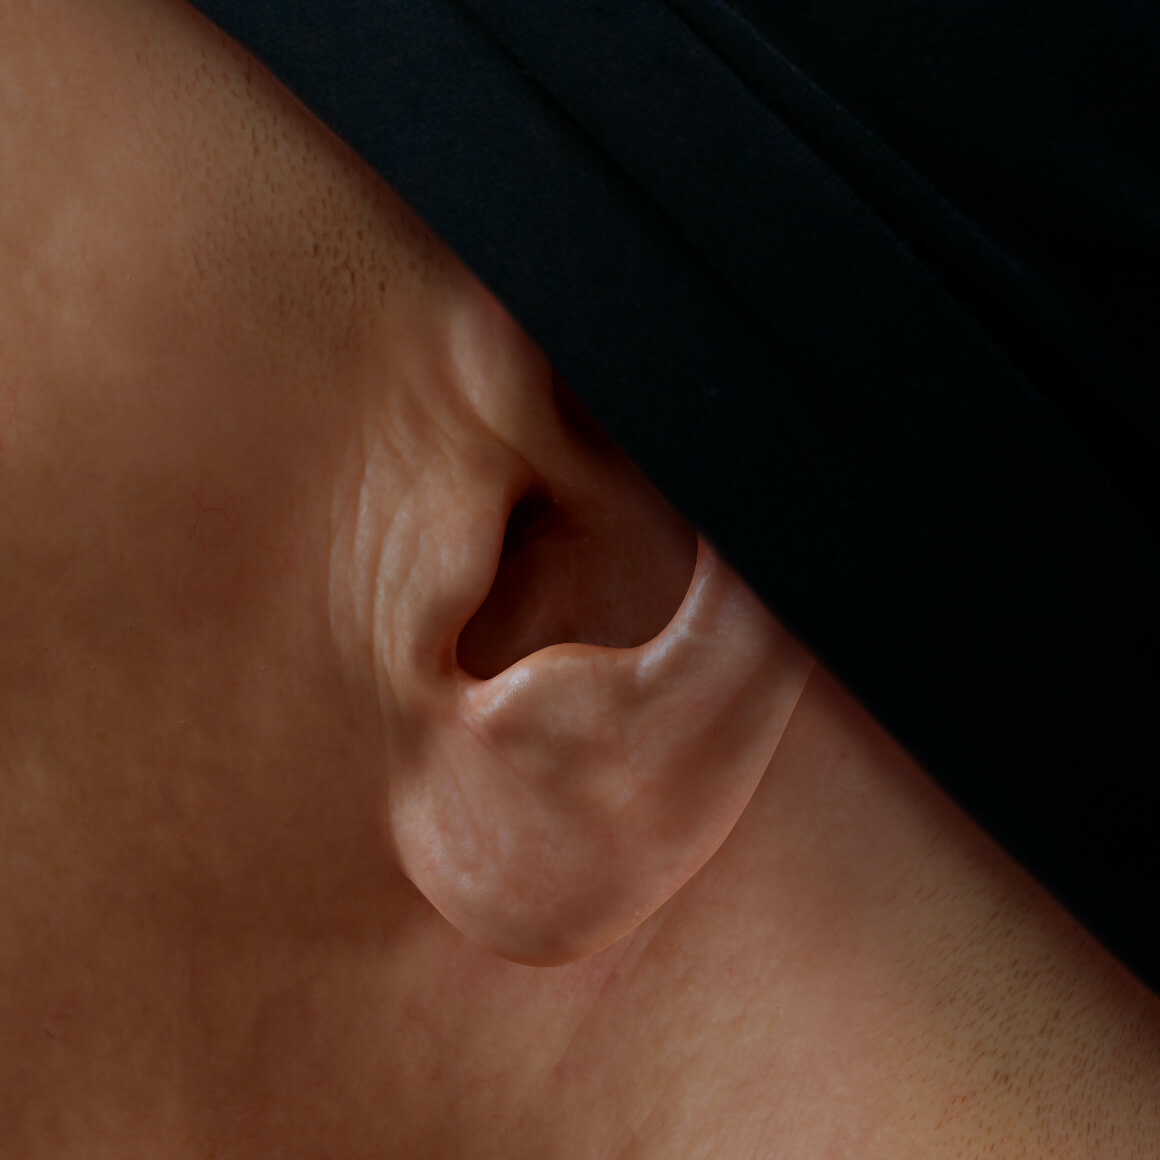 Left earlobe of a patient from Clinique Chloé positioned sideways after dermal filler injections for earlobe correction